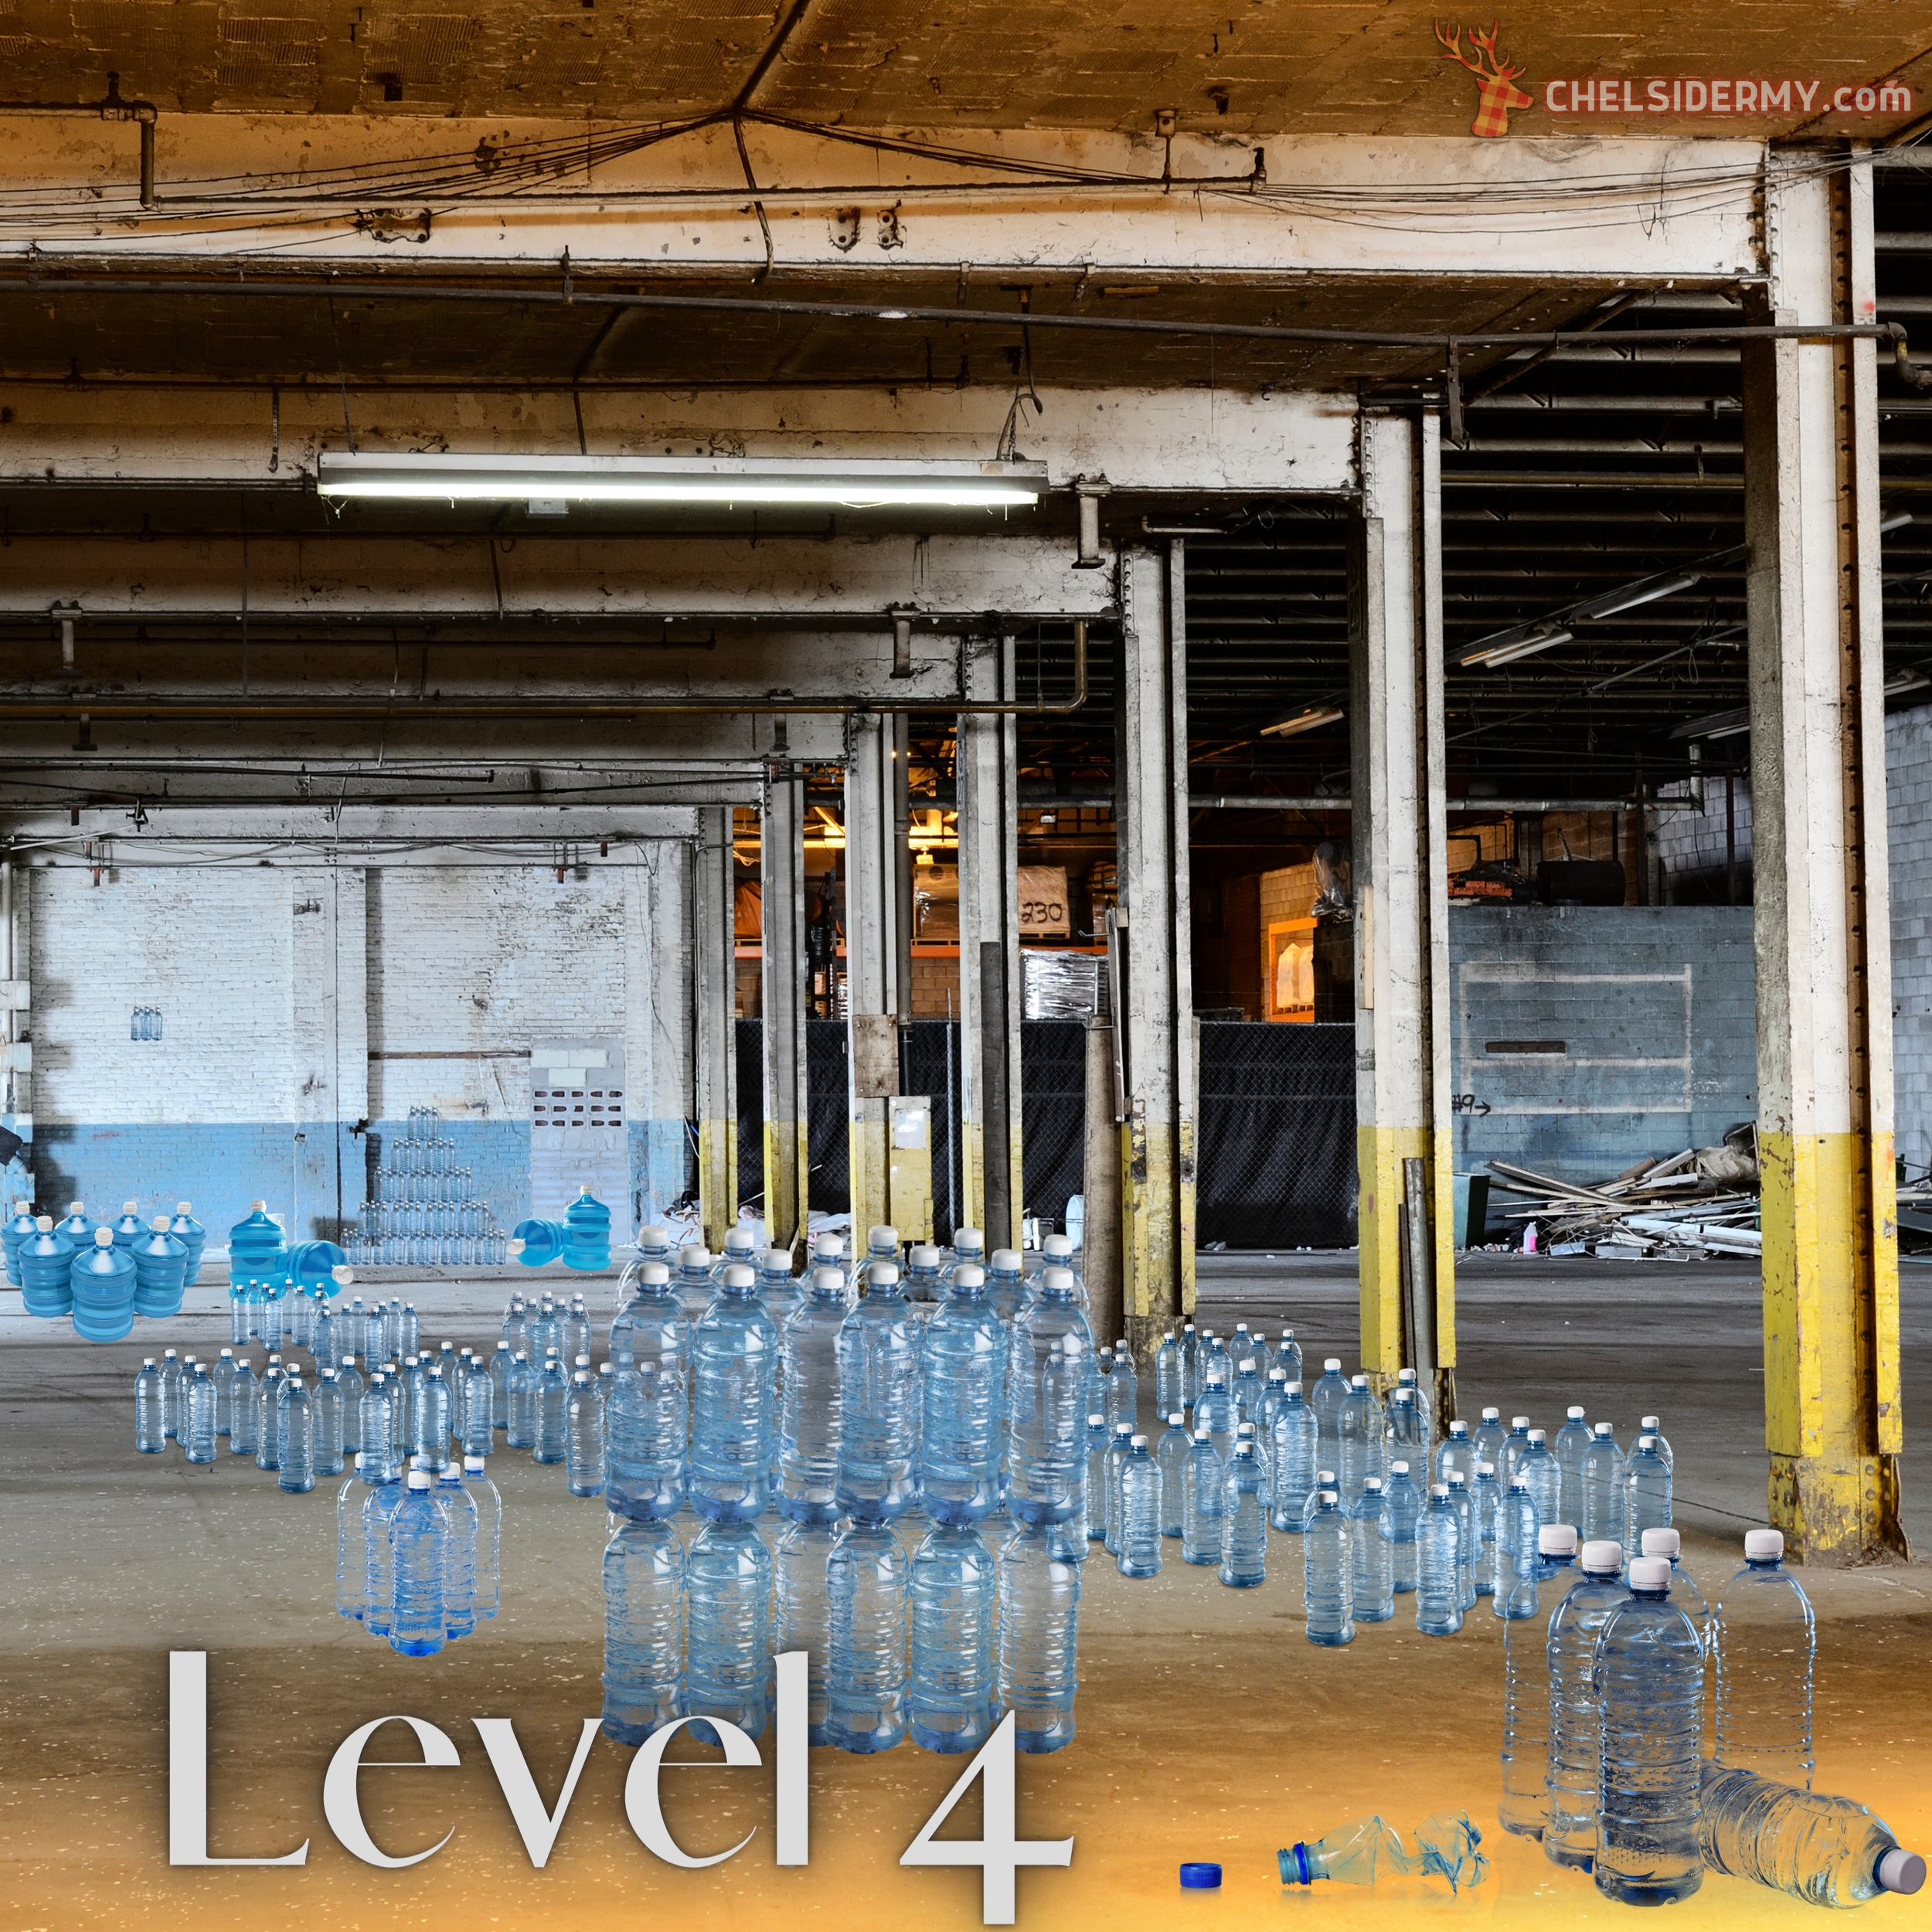 Level 4 - The Backrooms